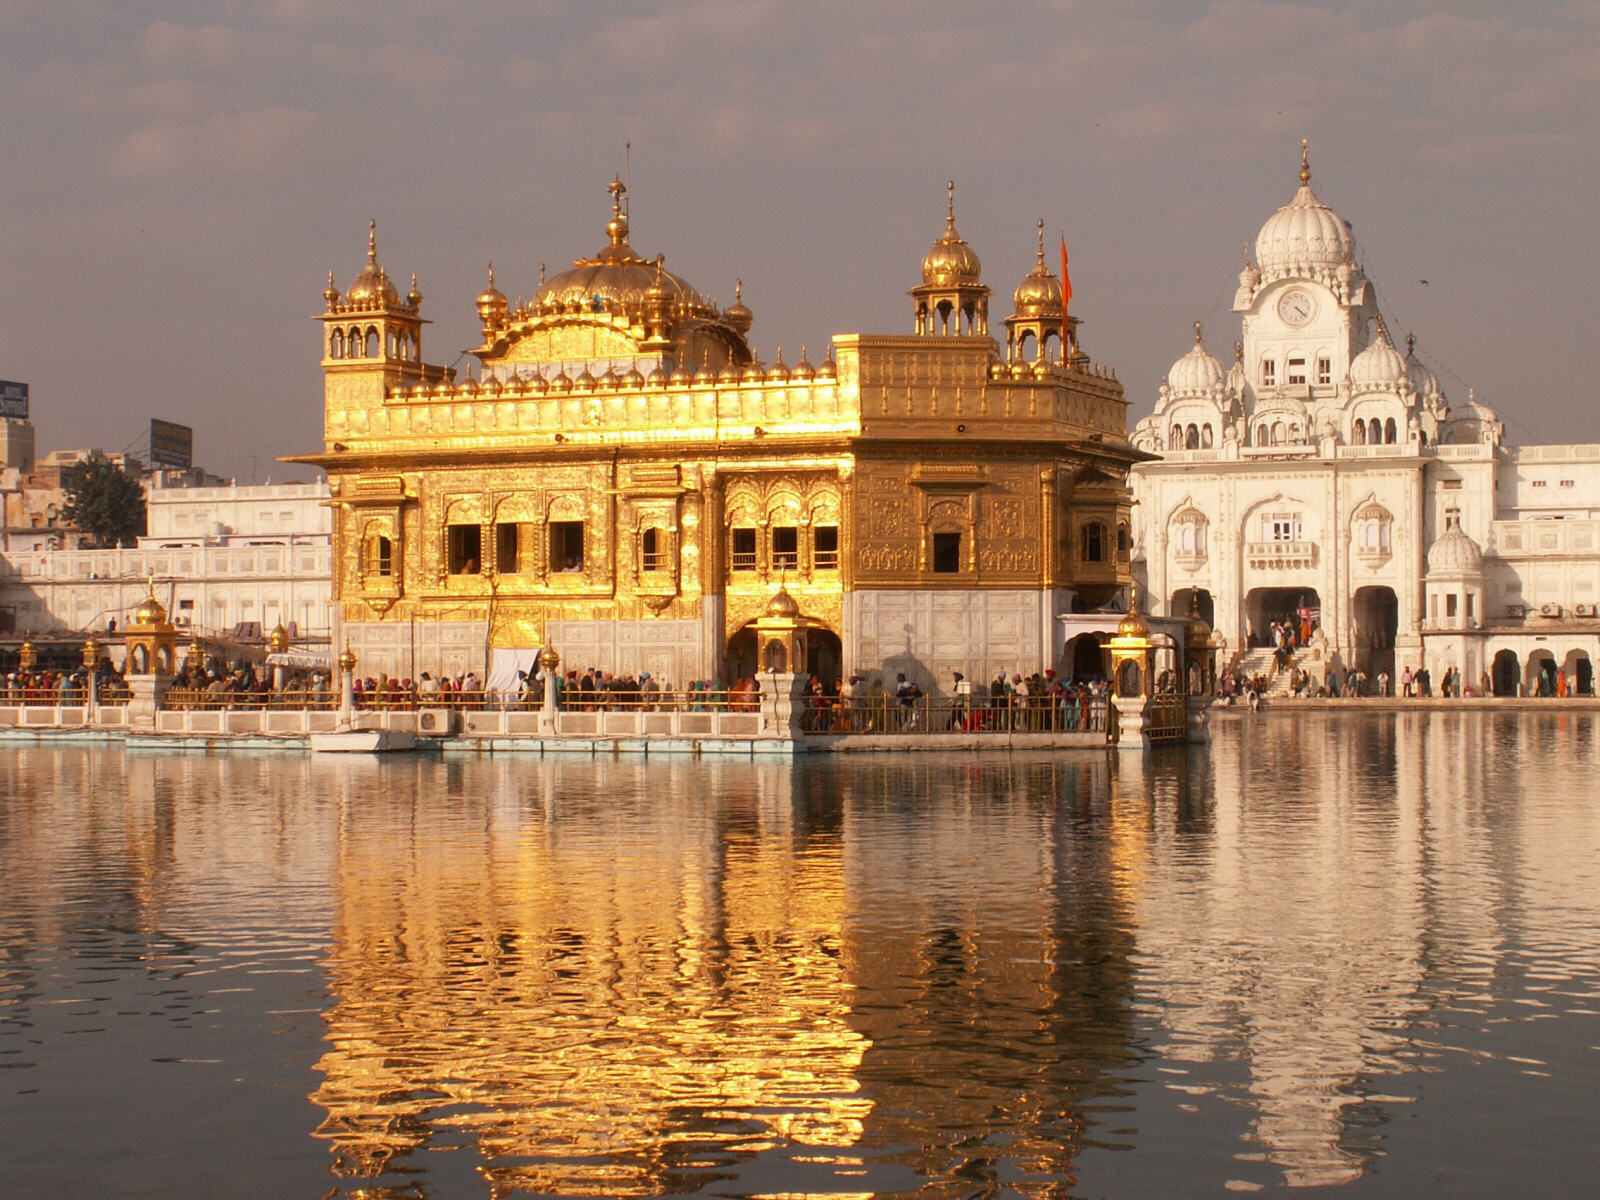 The Golden Temple at Amritsar, India